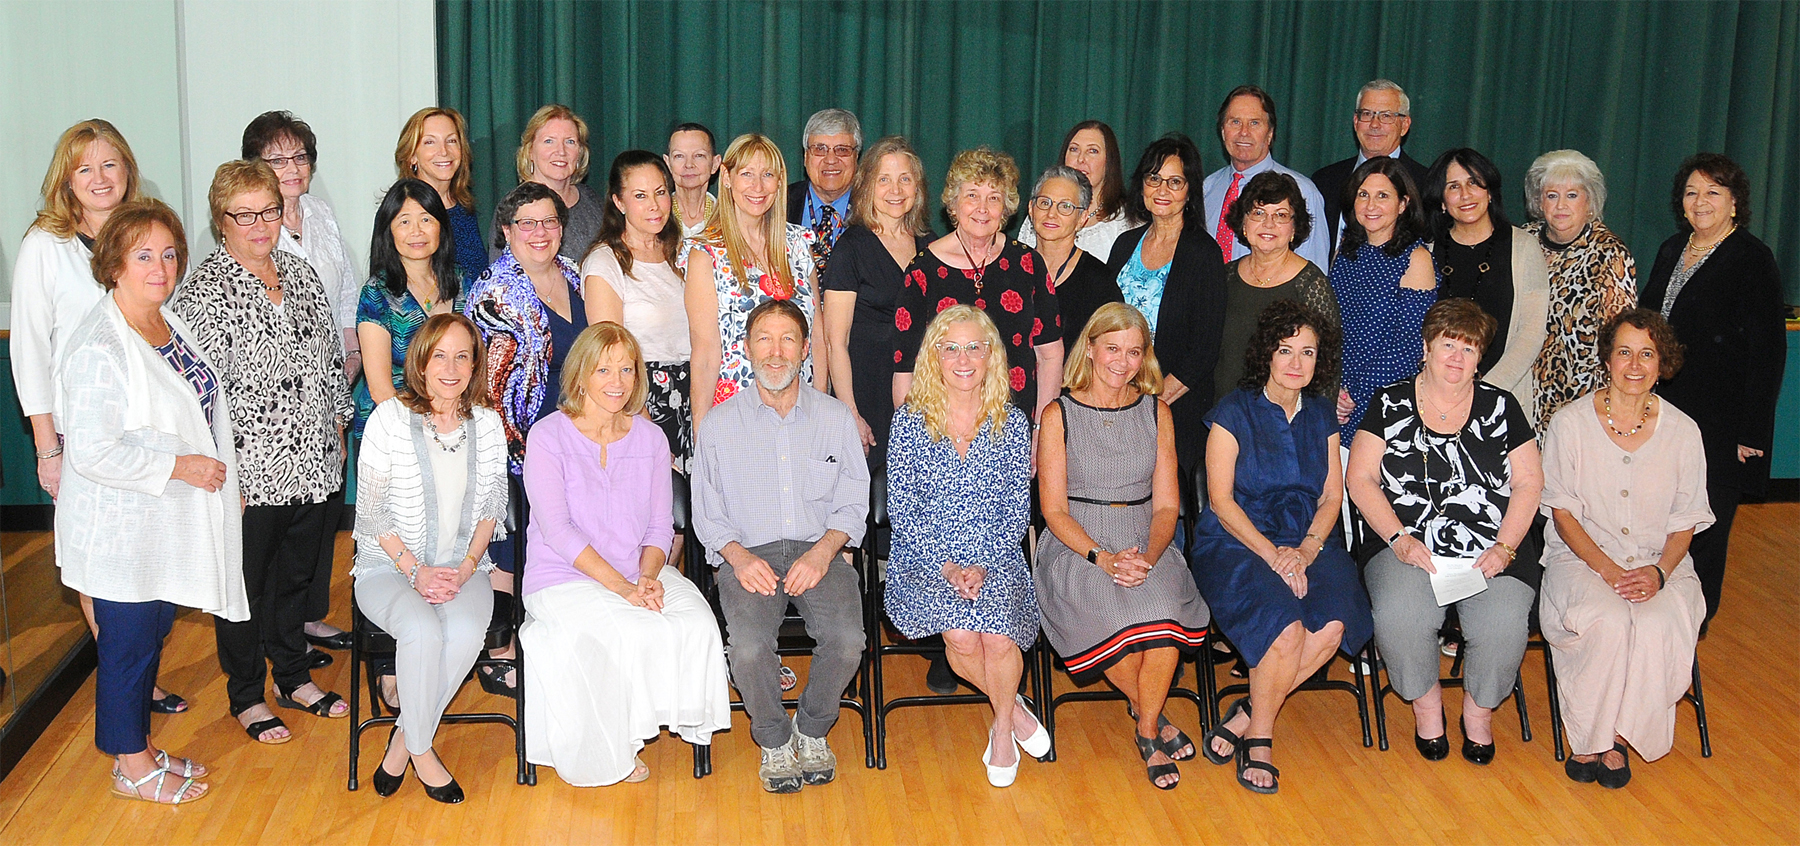 Great Neck Public School retirees were recognized by the Board of Education and the district’s professional associations. (Photo by Irwin Mendlinger)